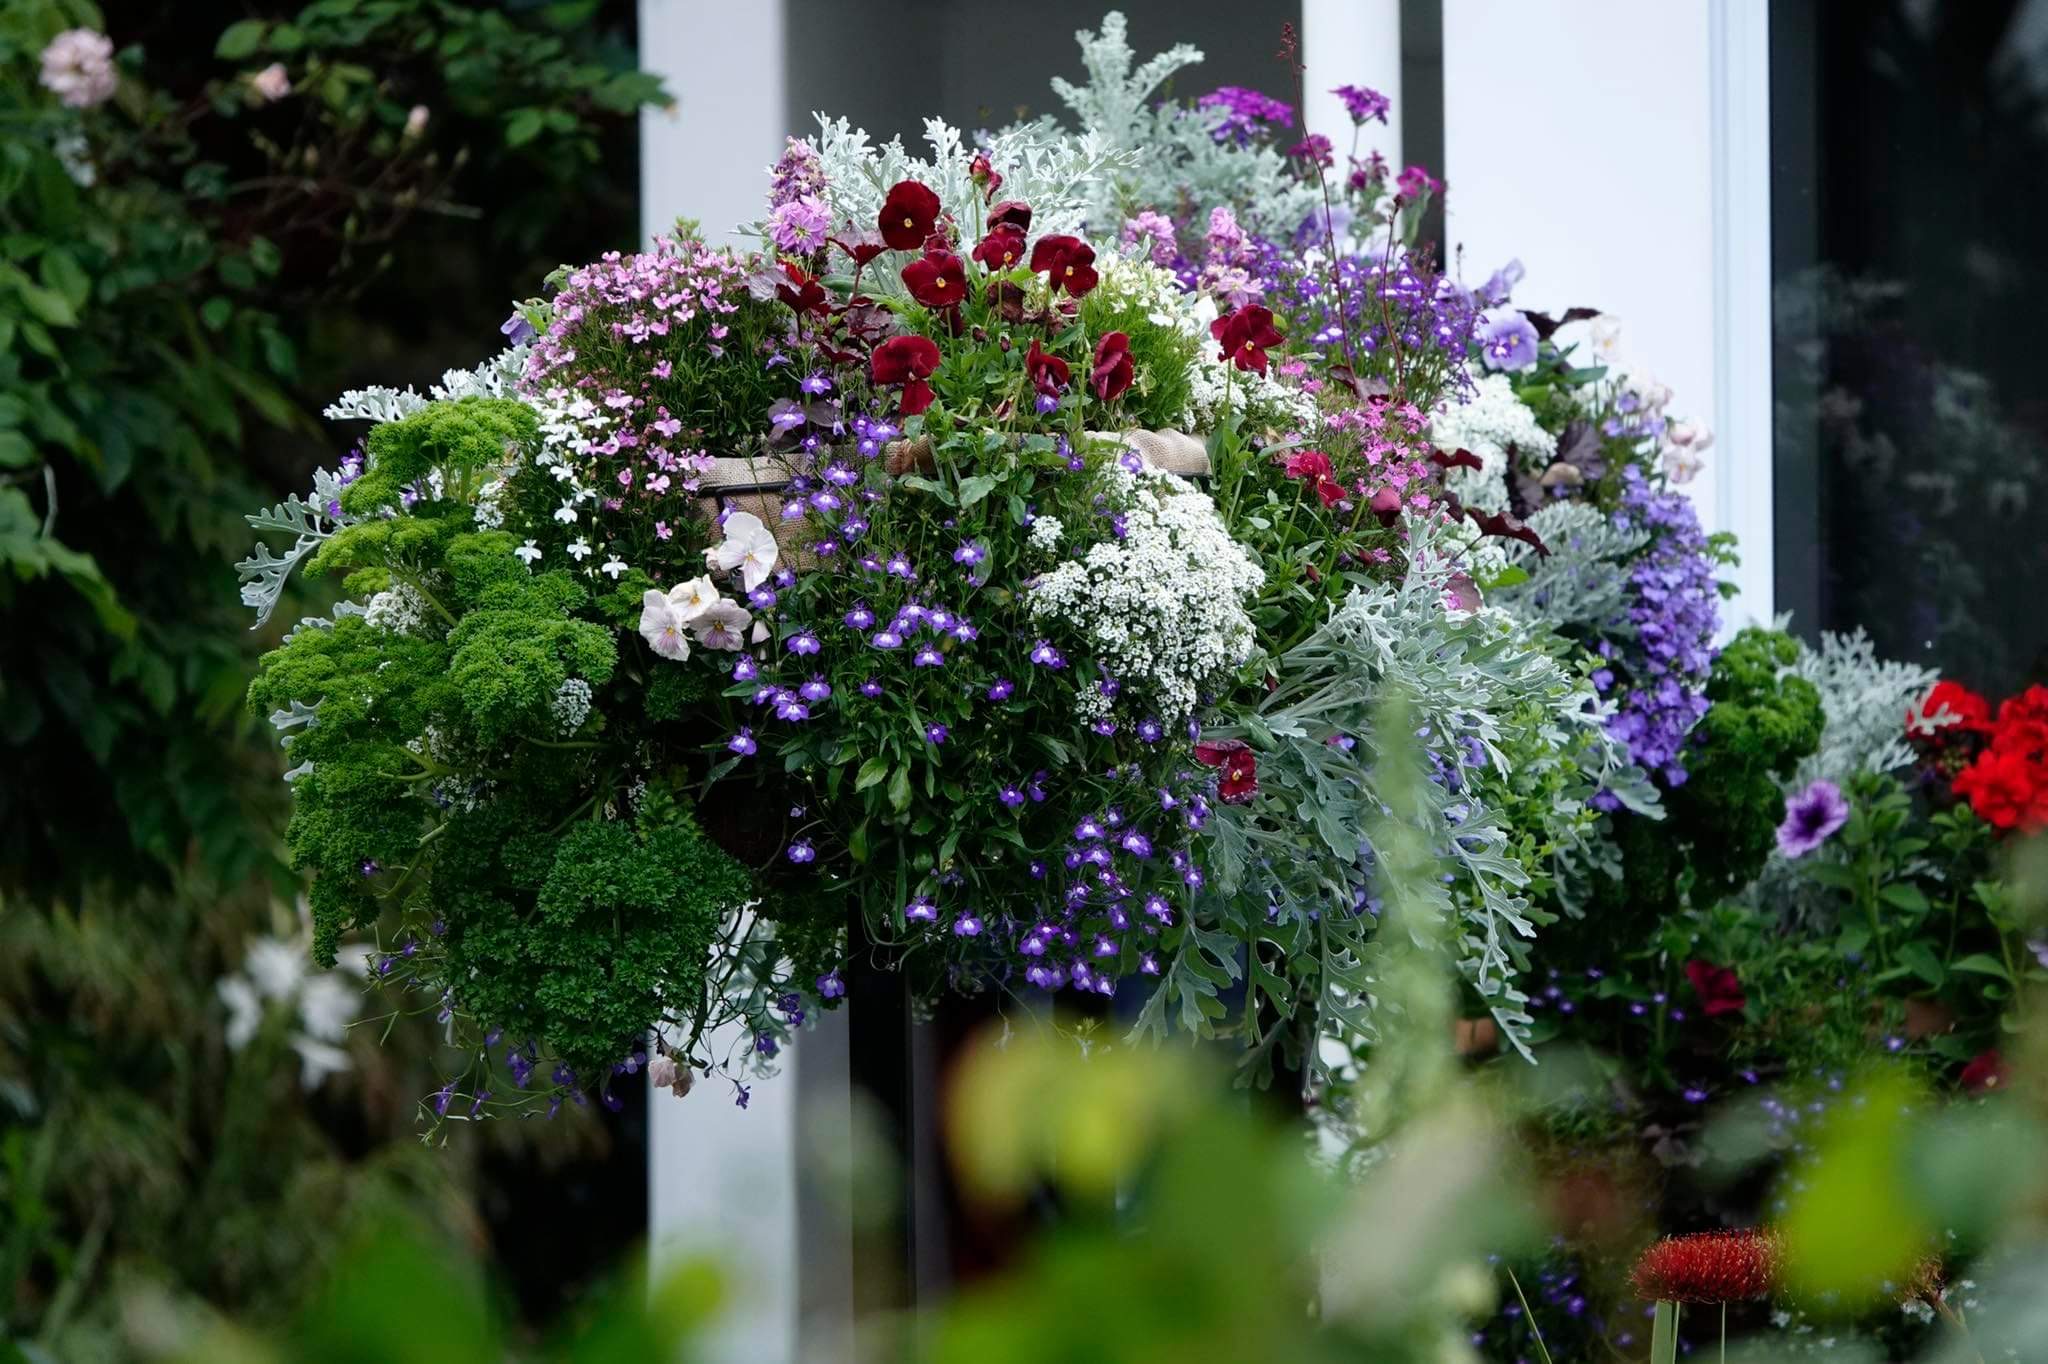 A hanging planter filled with colourful flowers cascading over the edge